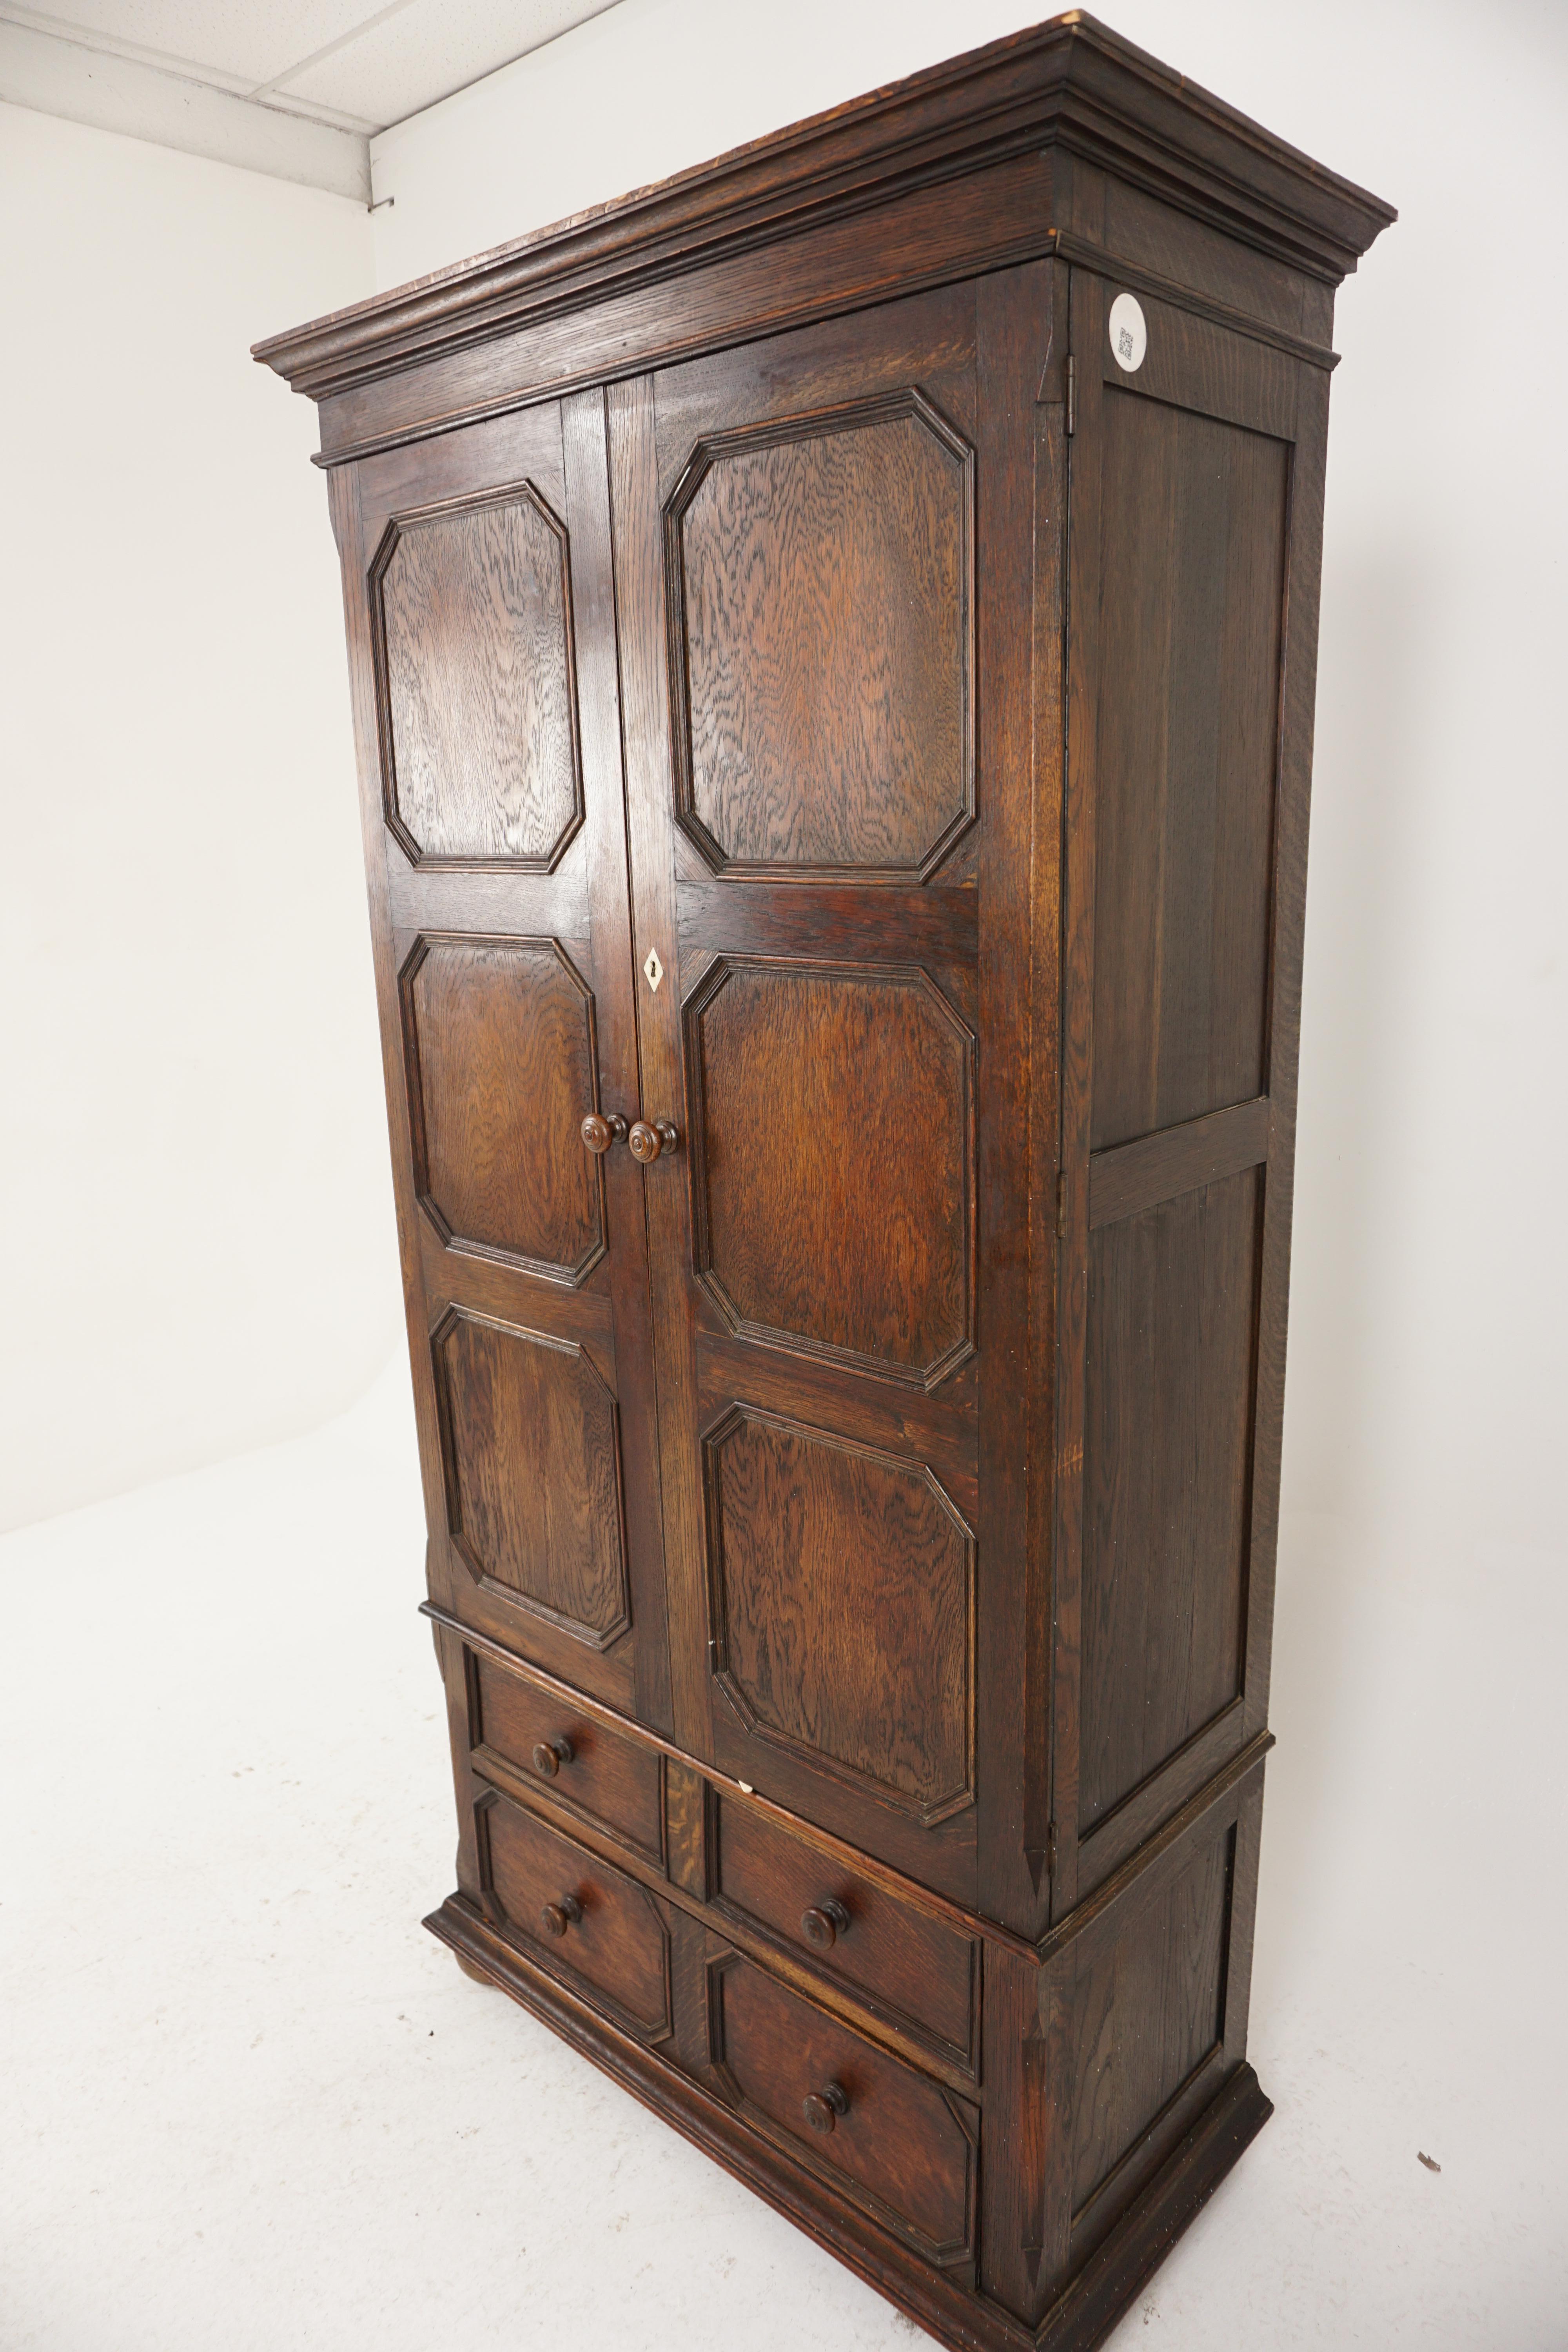 Antique Oak Armoire, Hall Cupboard, Wardrobe, Heal & Son London, England 1910, H1043

England 1910
Sold oak
Original finish
Moulded cornice on top
With a pair of panelled doors with wooden knobs and a bone escutcheon
Opens to reveal brass hooks and